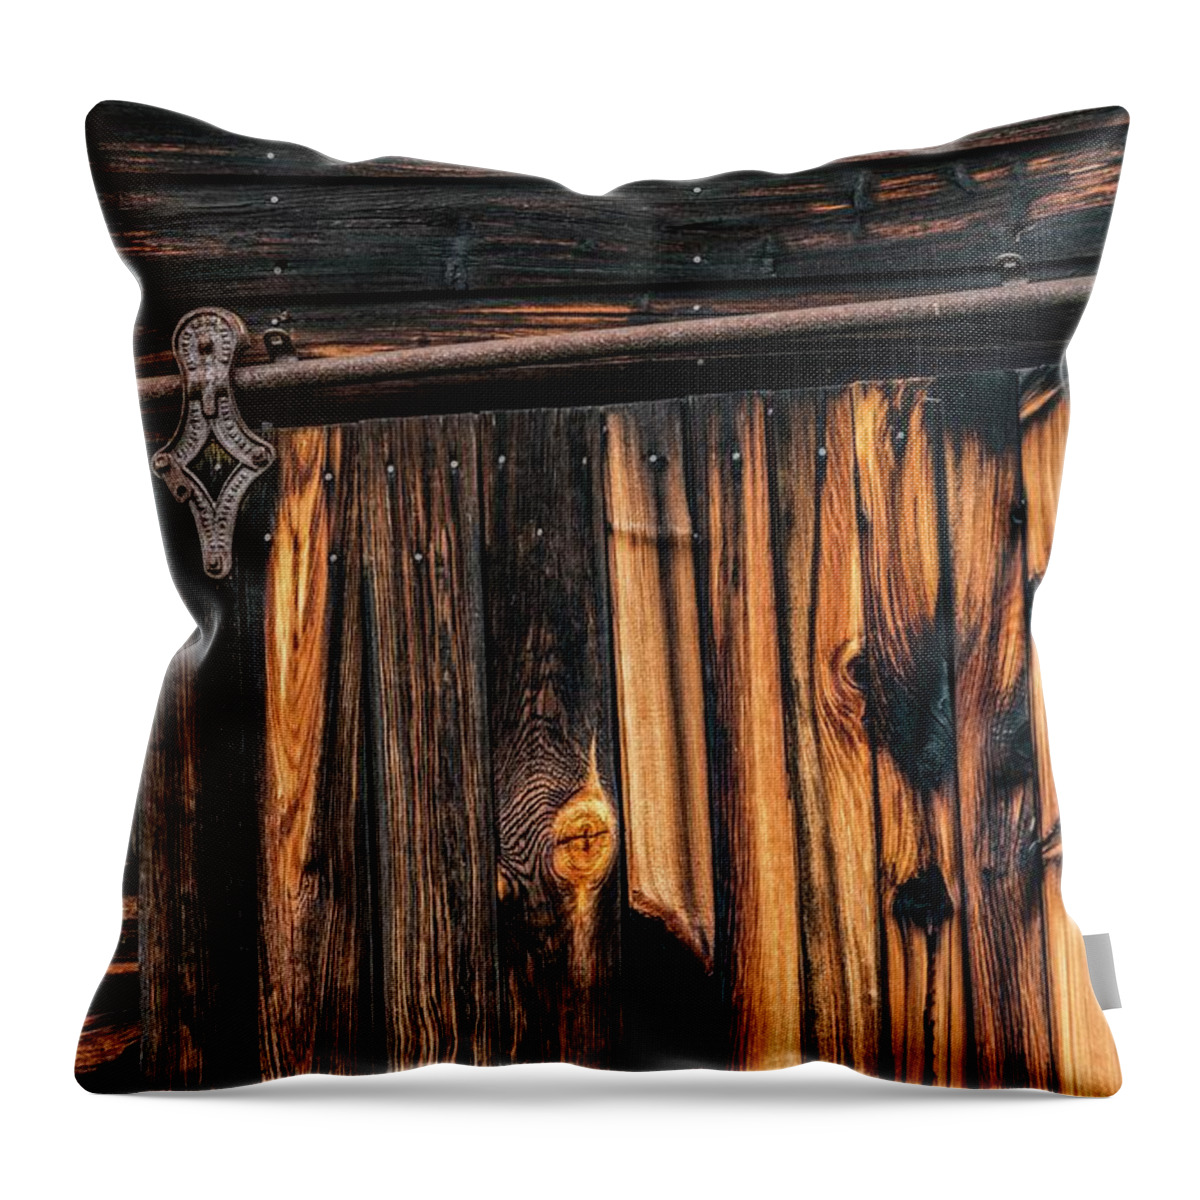  Throw Pillow featuring the photograph Purposely made by Pamela Taylor